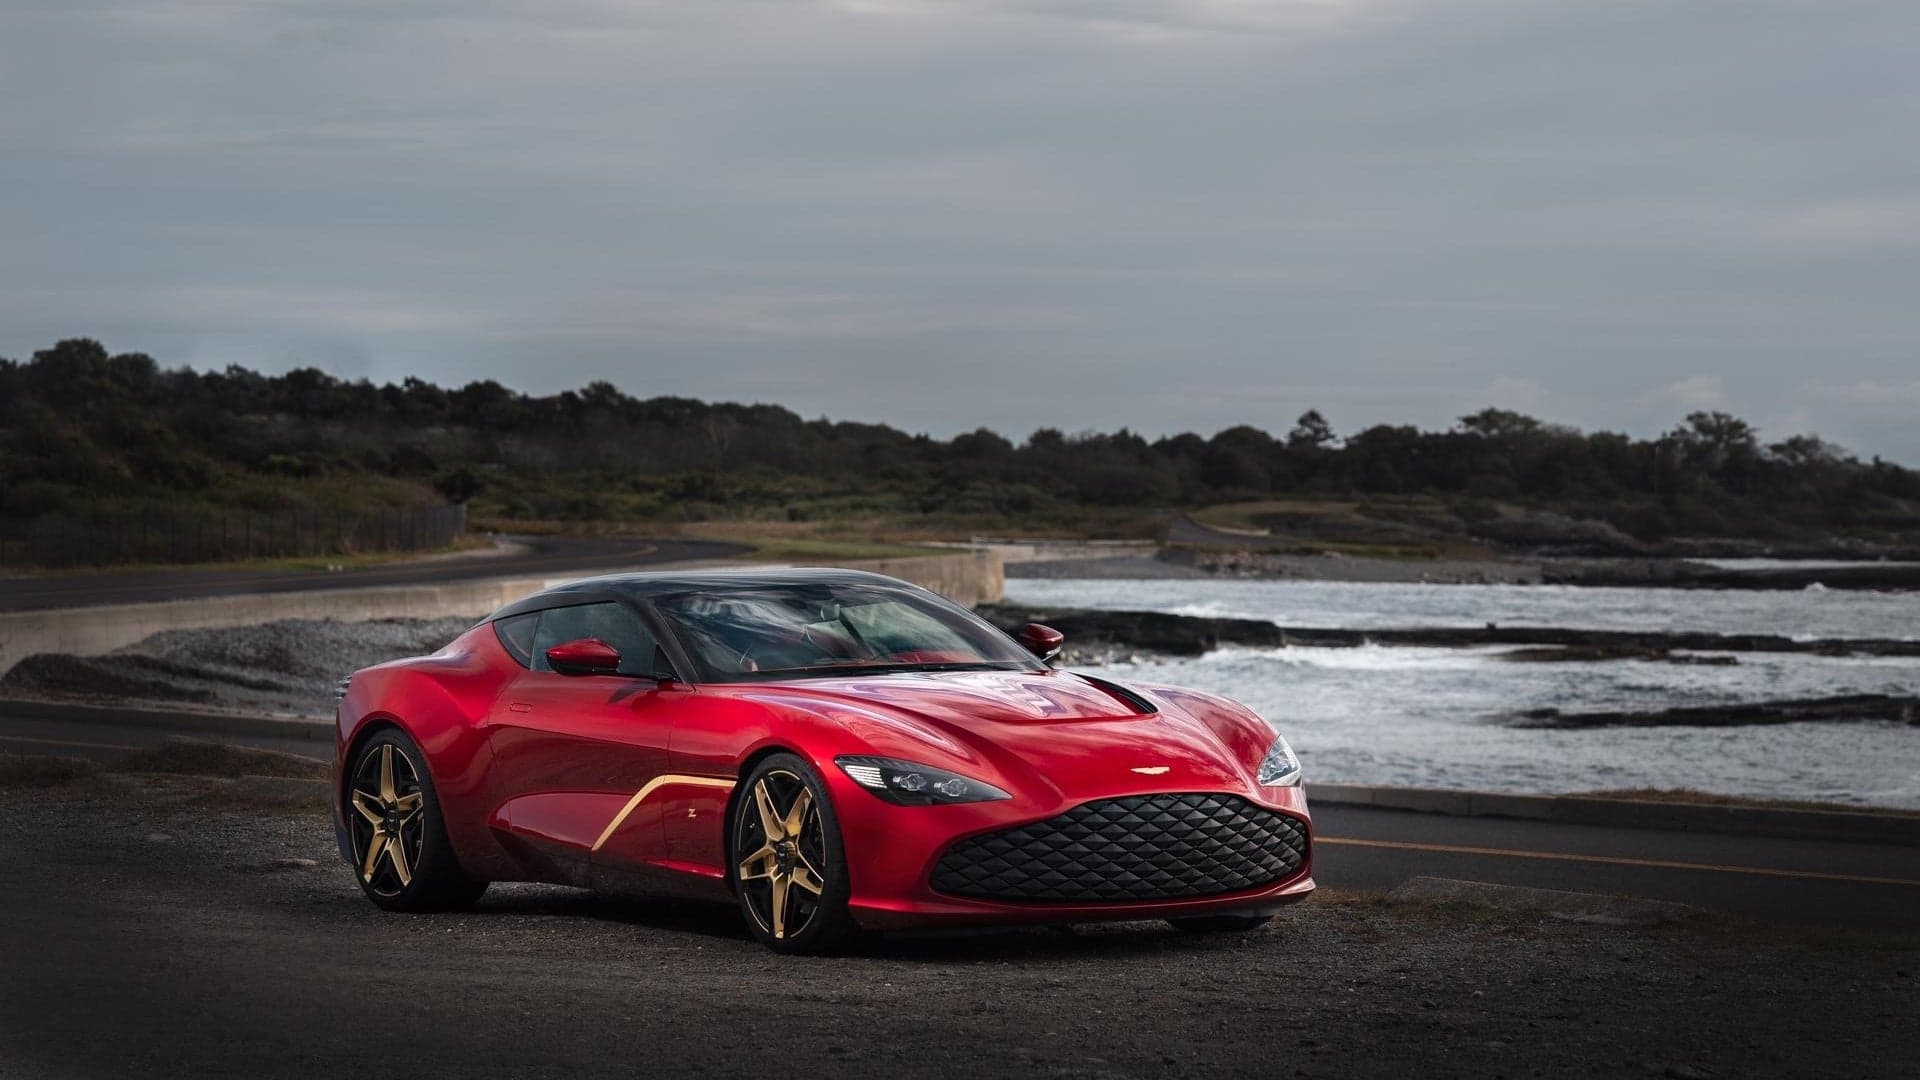 Aston Martin Stokes the DBS GT Zagato’s Fires to the Tune of 760 HP